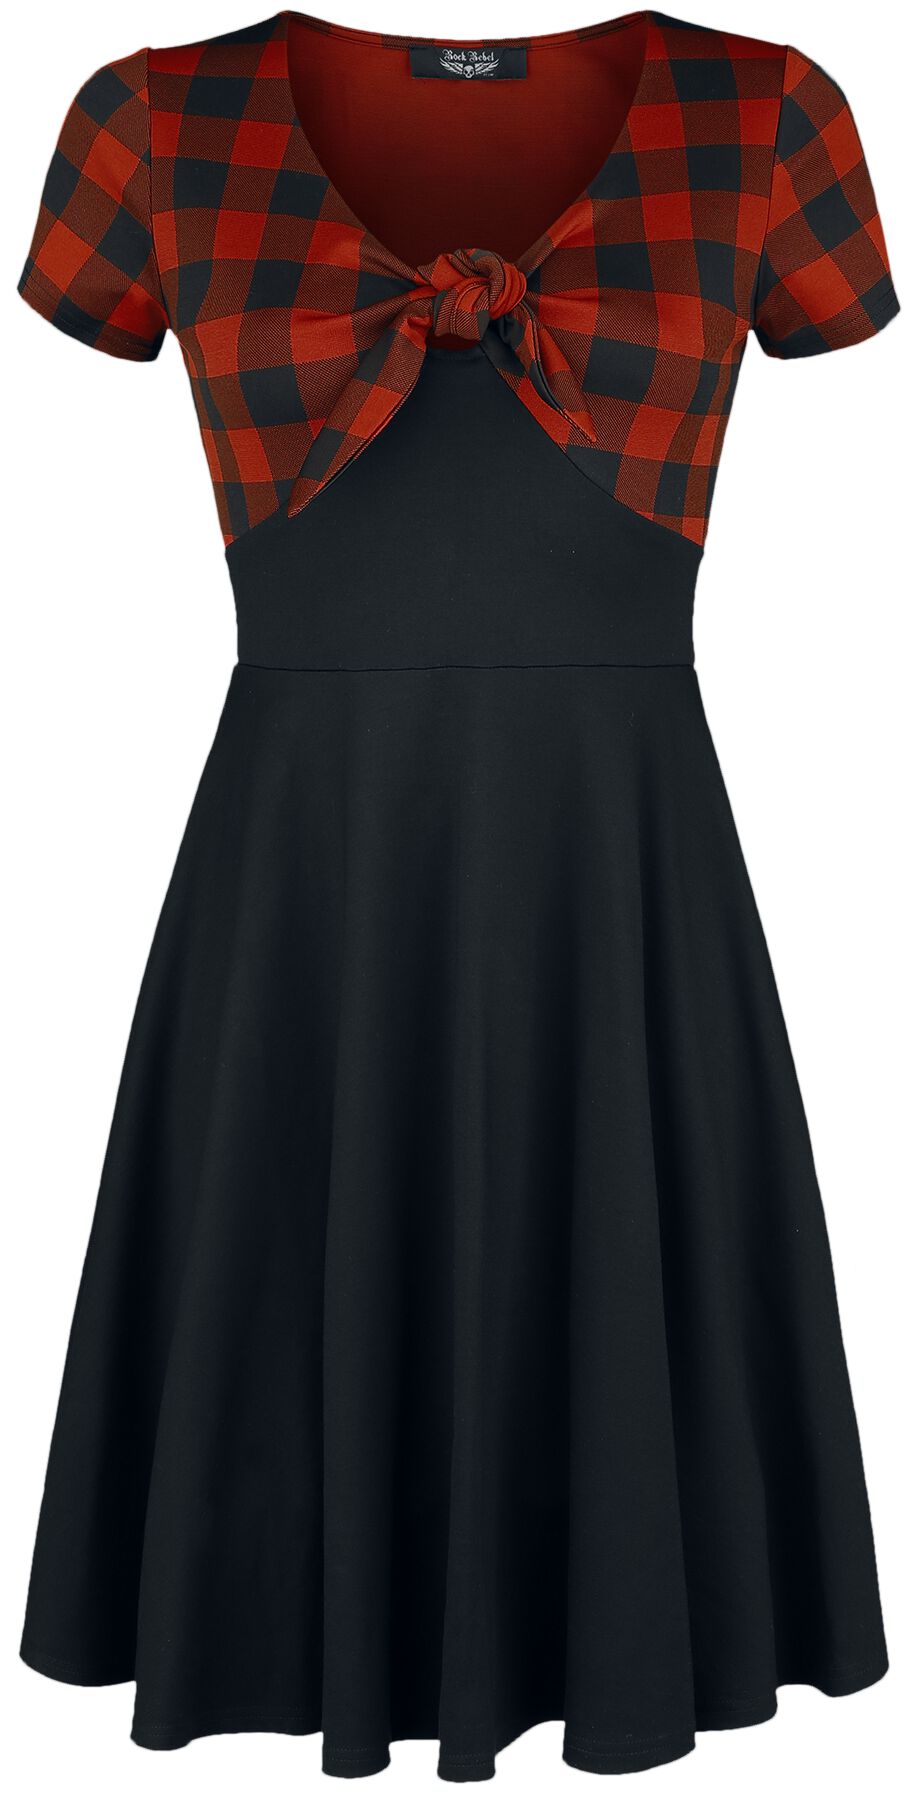 Image of Miniabito Rockabilly di Rock Rebel by EMP - Rock Rebel Tie-Front Dress with Checked Pattern - S a XXL - Donna - nero/rosso